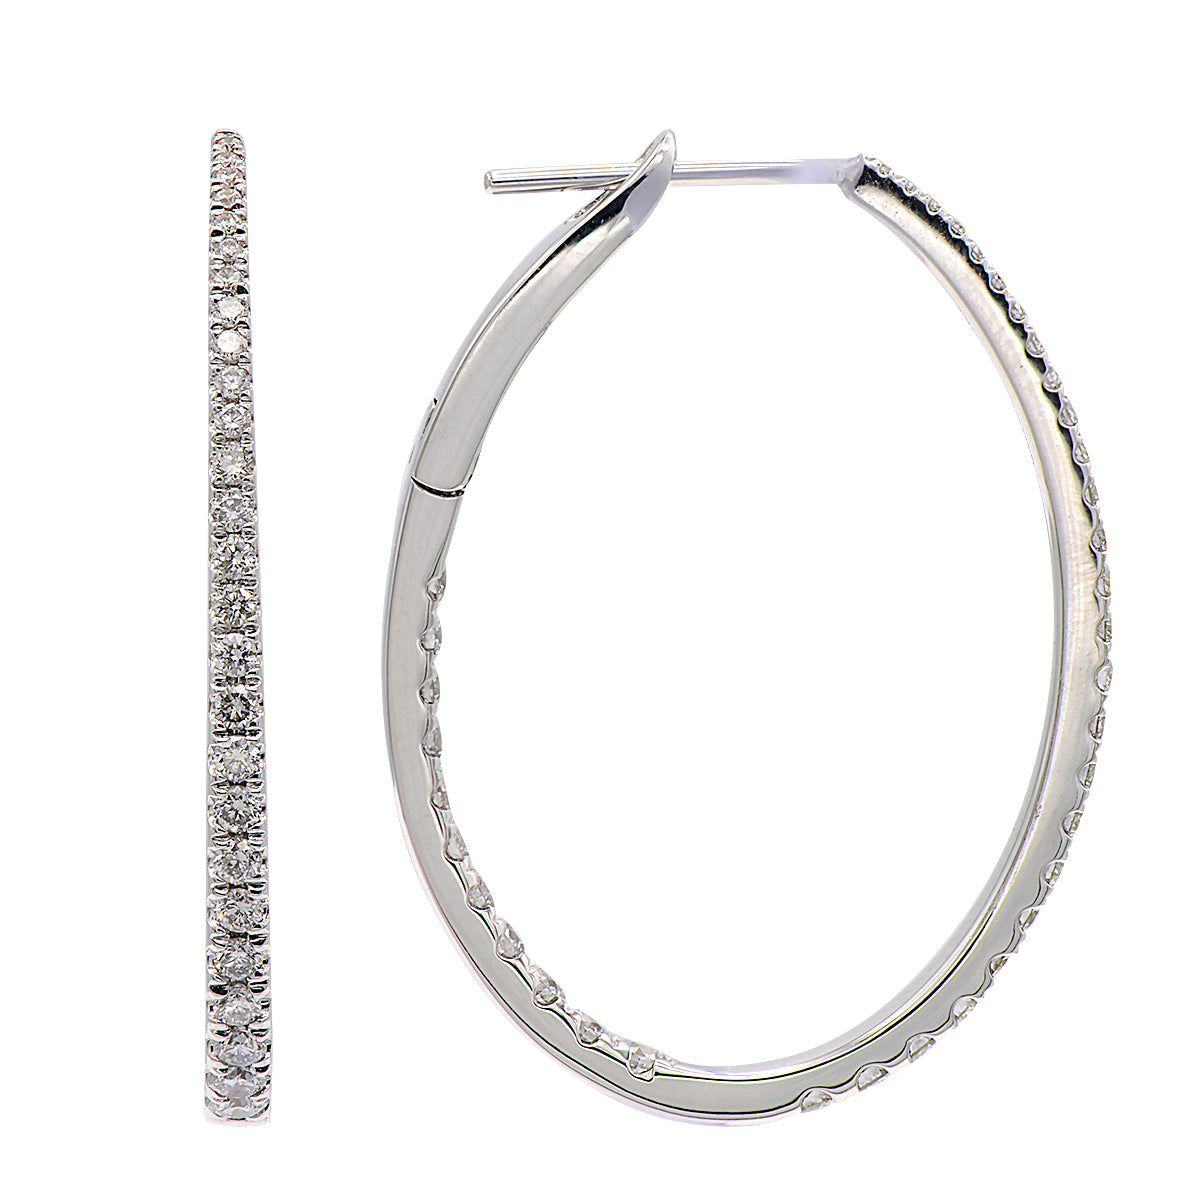 14K White Gold Inside and Out Hoop Earrings